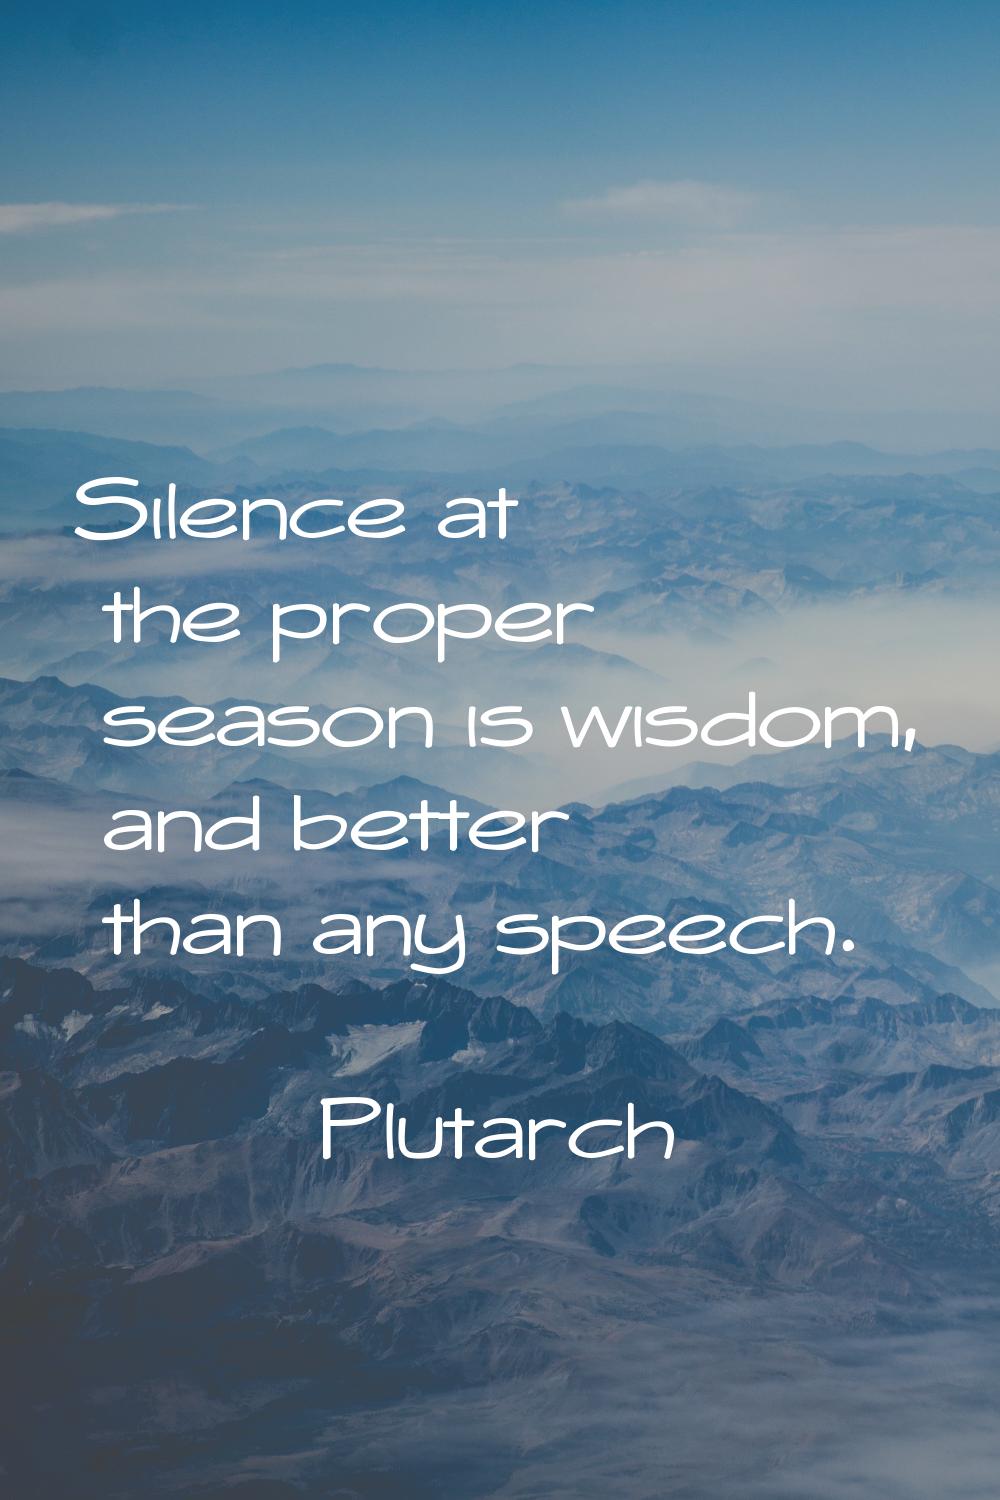 Silence at the proper season is wisdom, and better than any speech.